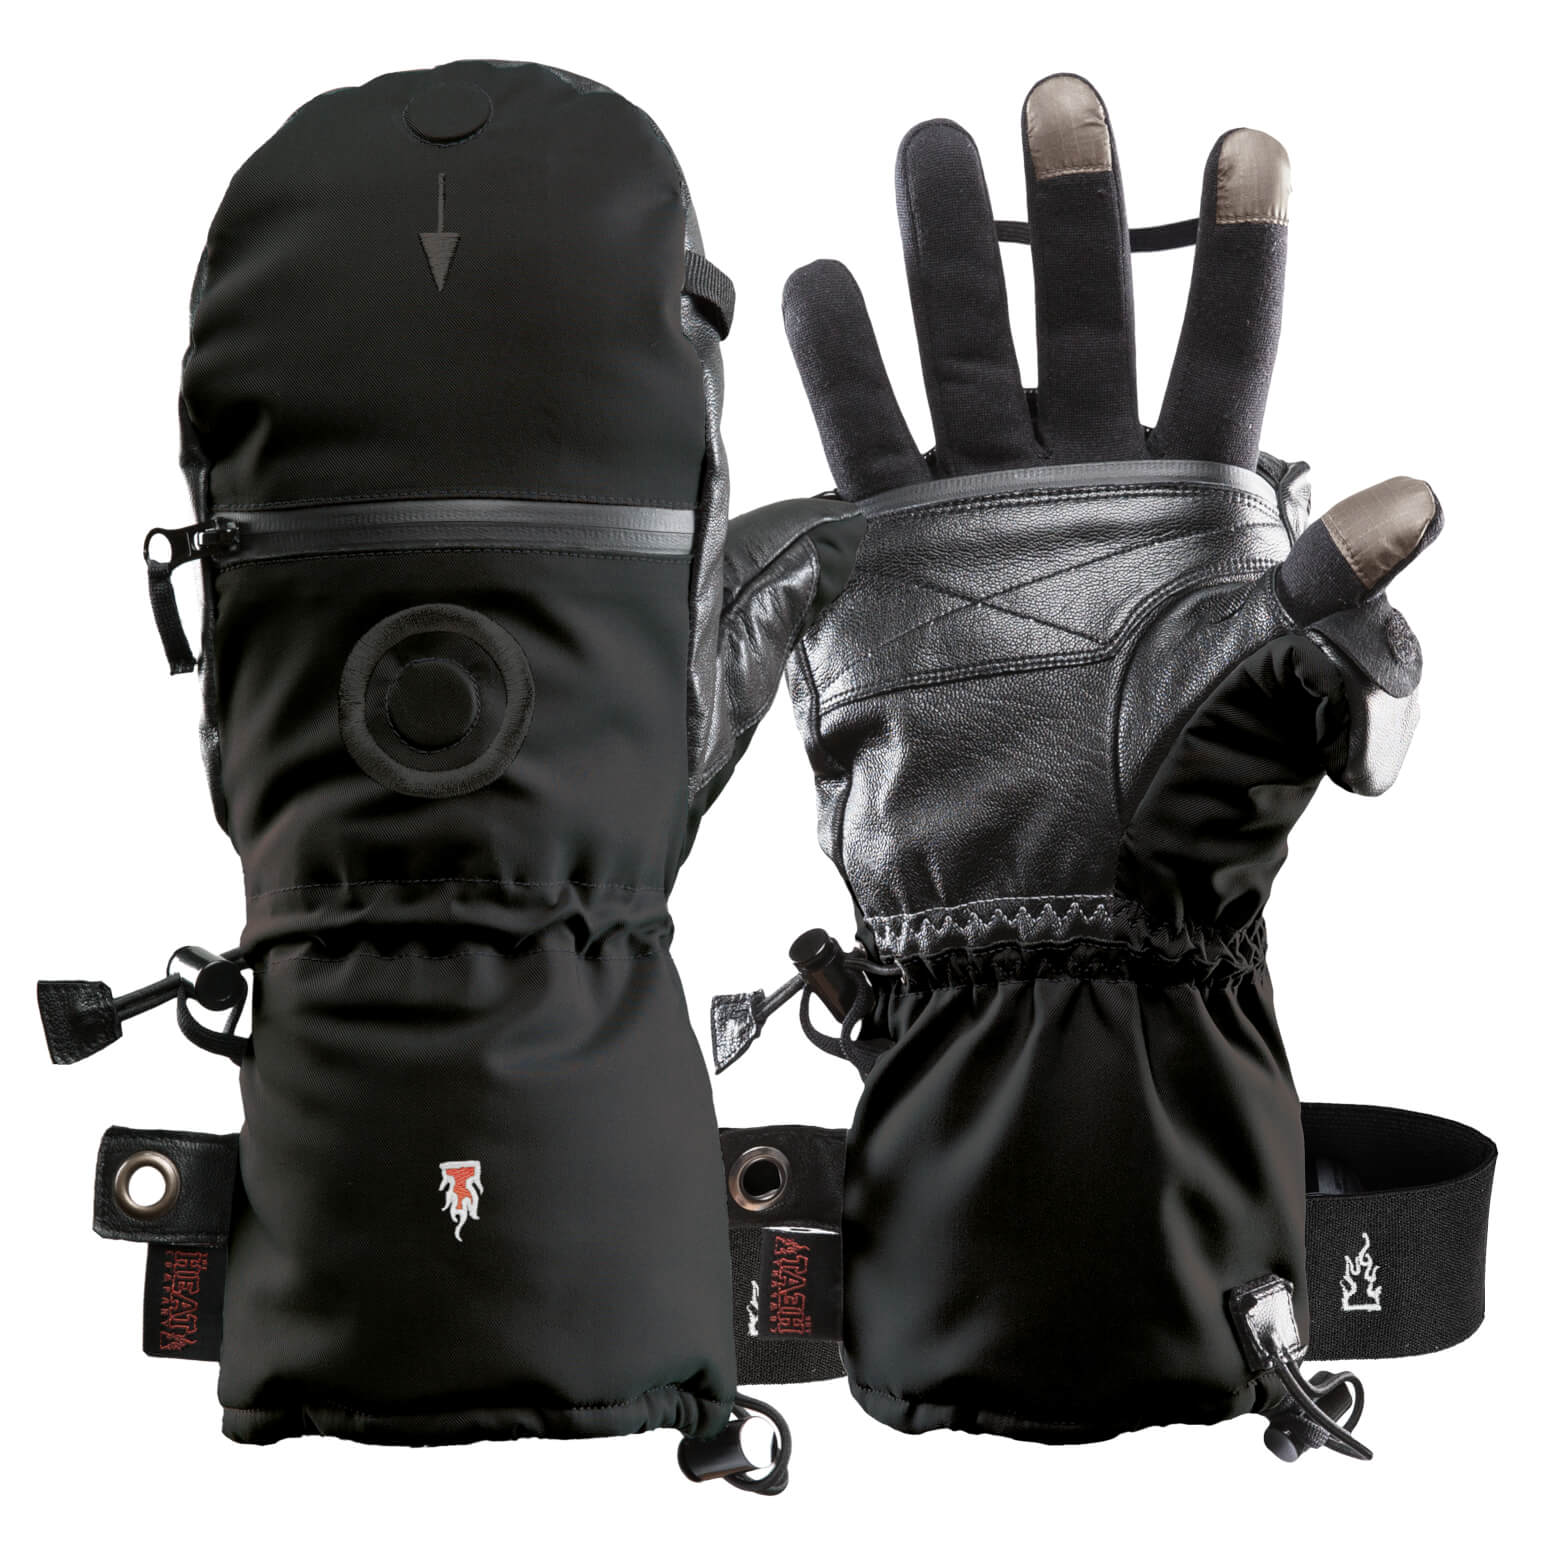 The Heat Company Heat 3 Smart Pro Mittens/Gloves Size 11, Black Glove w/Inner Liners, Large, Touchscreen Capable, Gender Unisex 33331